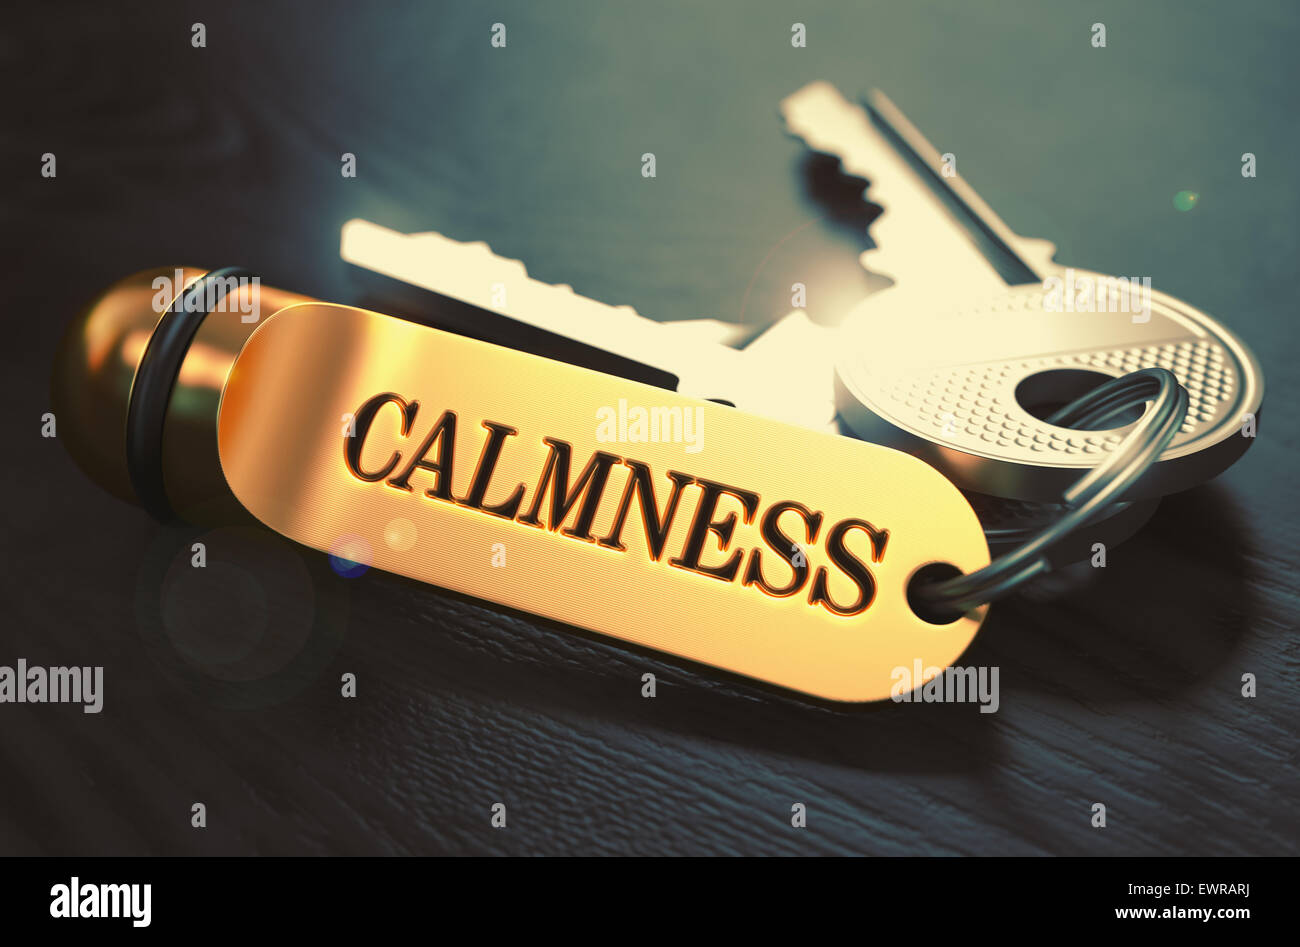 Calmness Concept. Keys with Golden Keyring on Black Wooden Table. Closeup View, Selective Focus, 3D Render. Toned Image. Stock Photo